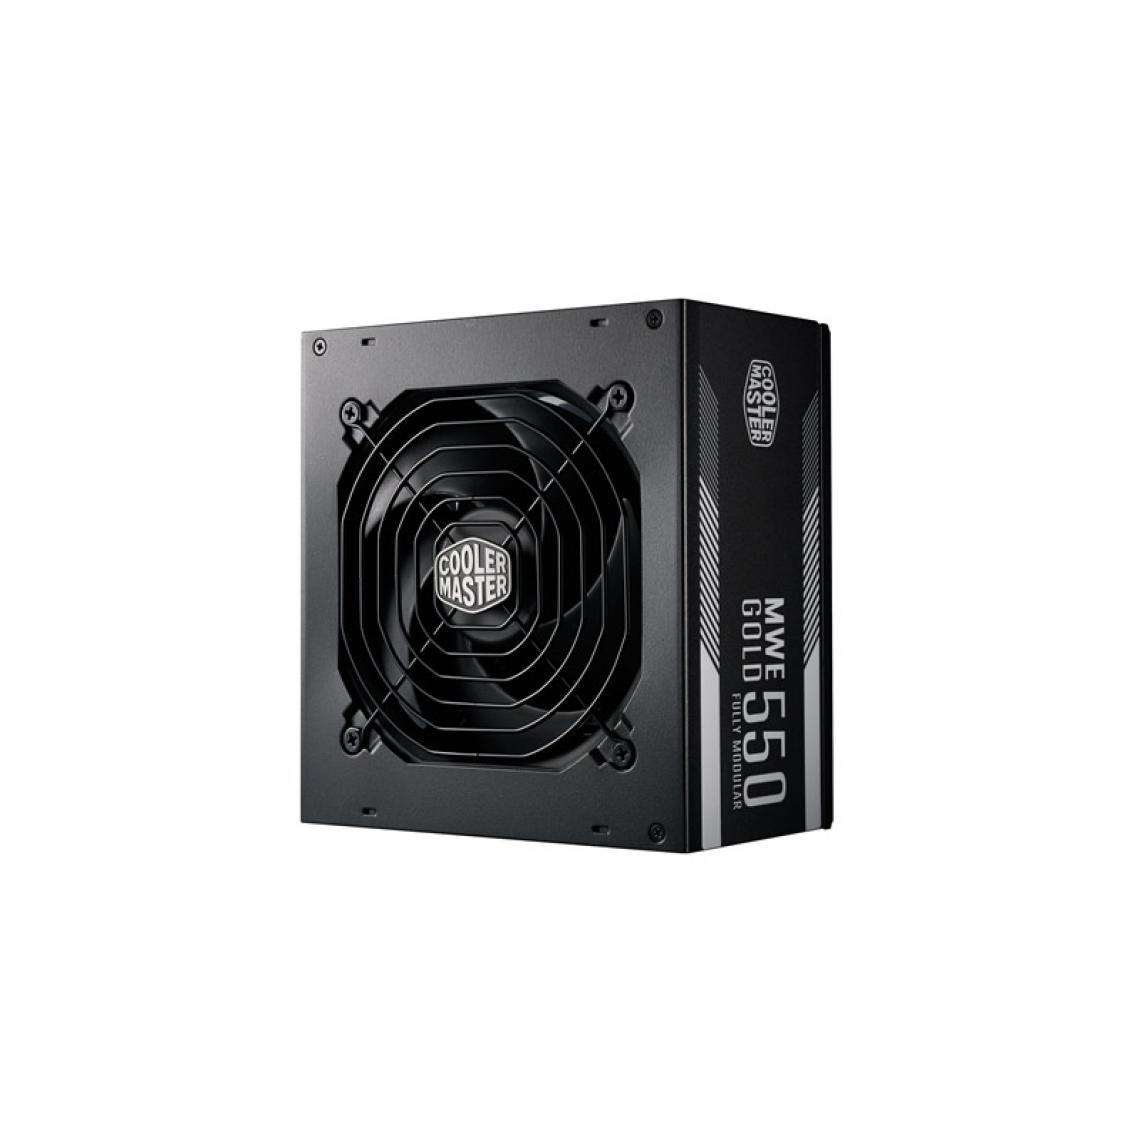 Cooler Master - ATX 550W - Alimentation modulaire